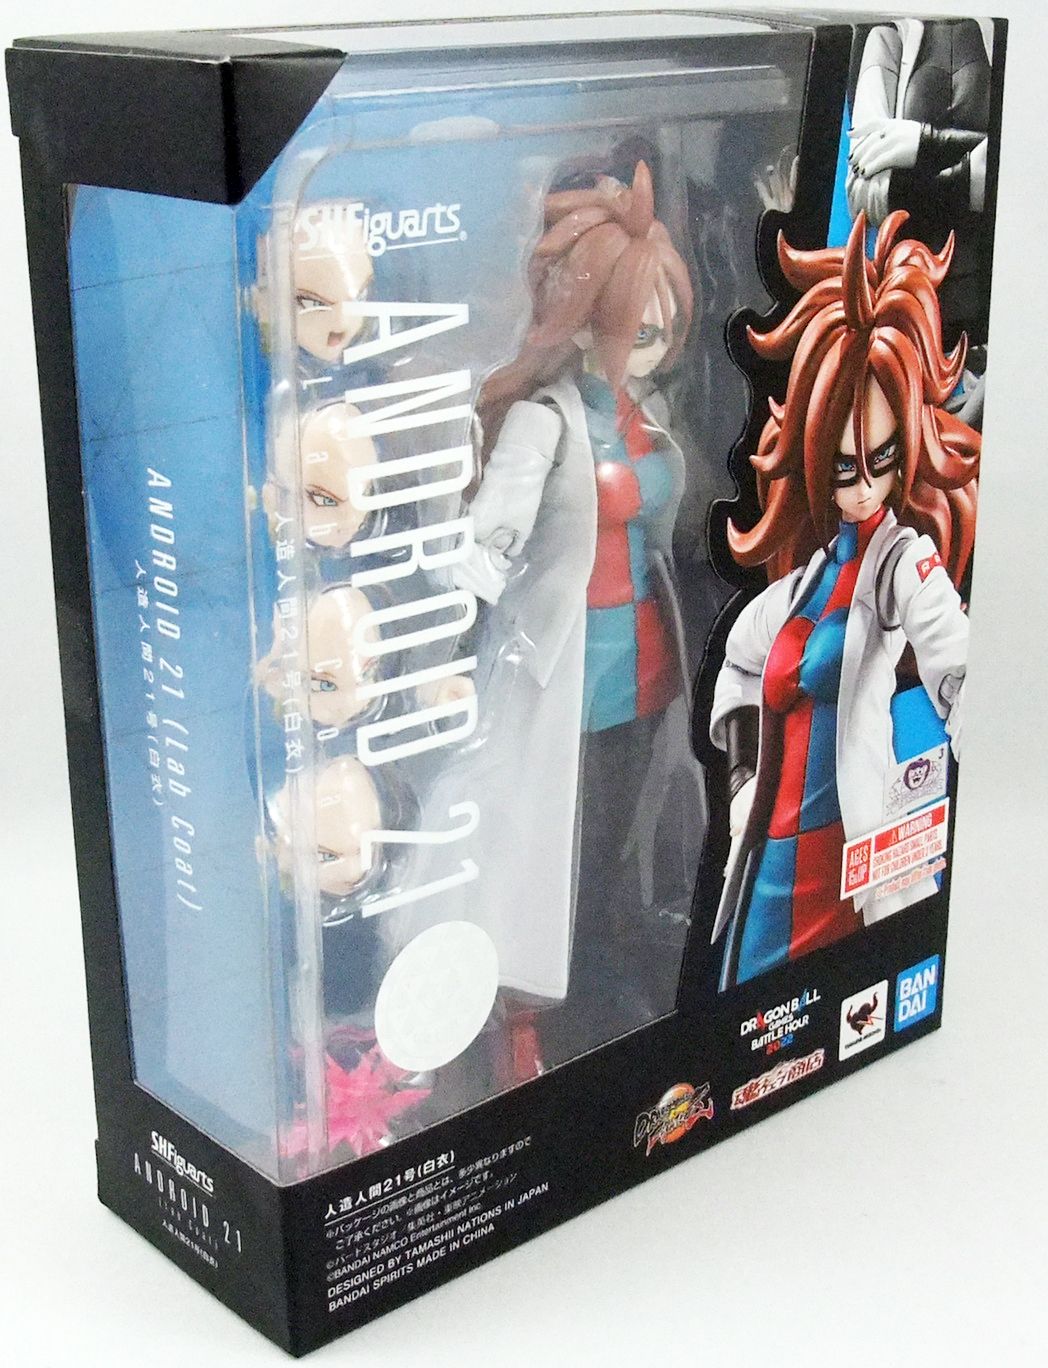 Android 21 (Lab Coat) Coming Soon to S.H.Figuarts!]